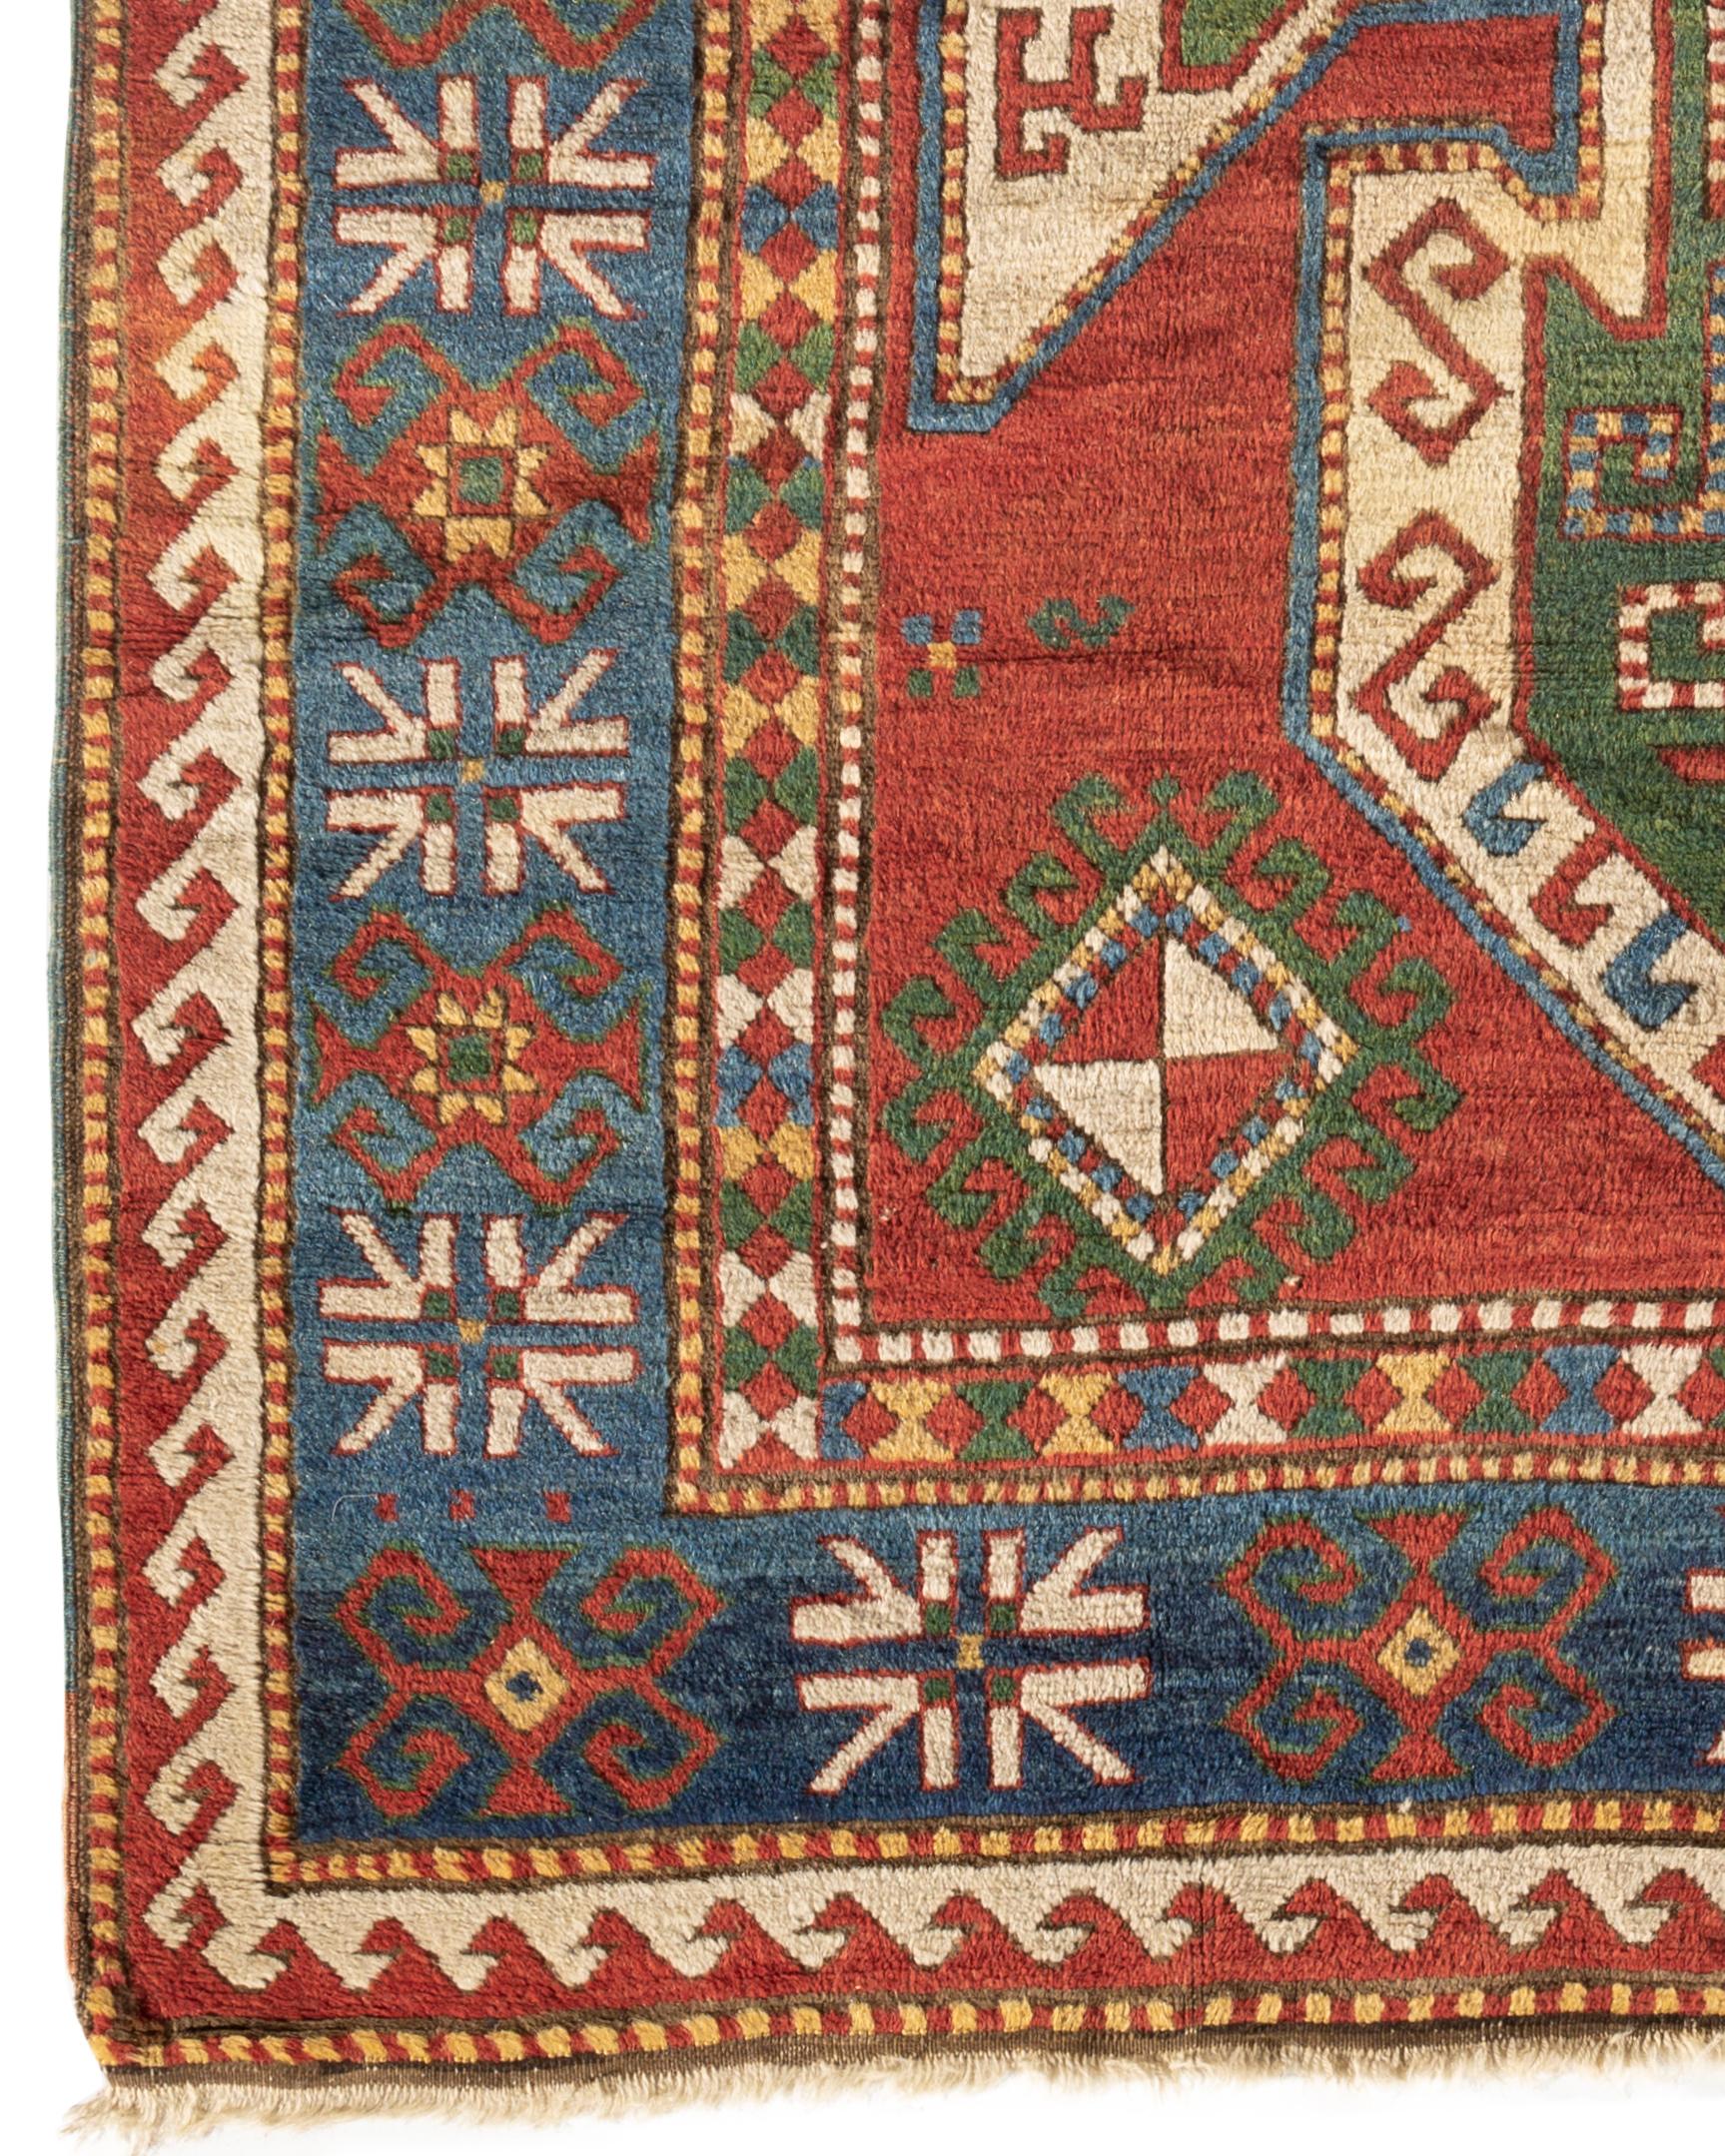 Antique Caucasian Sewan Sevan Kazak rug, circa 1880. The large shield medallion typical on Sewan Kazaks in greens and ivory on an almost madder red field. The main soft blue border with star motifs itself enclose within guard borders to create a